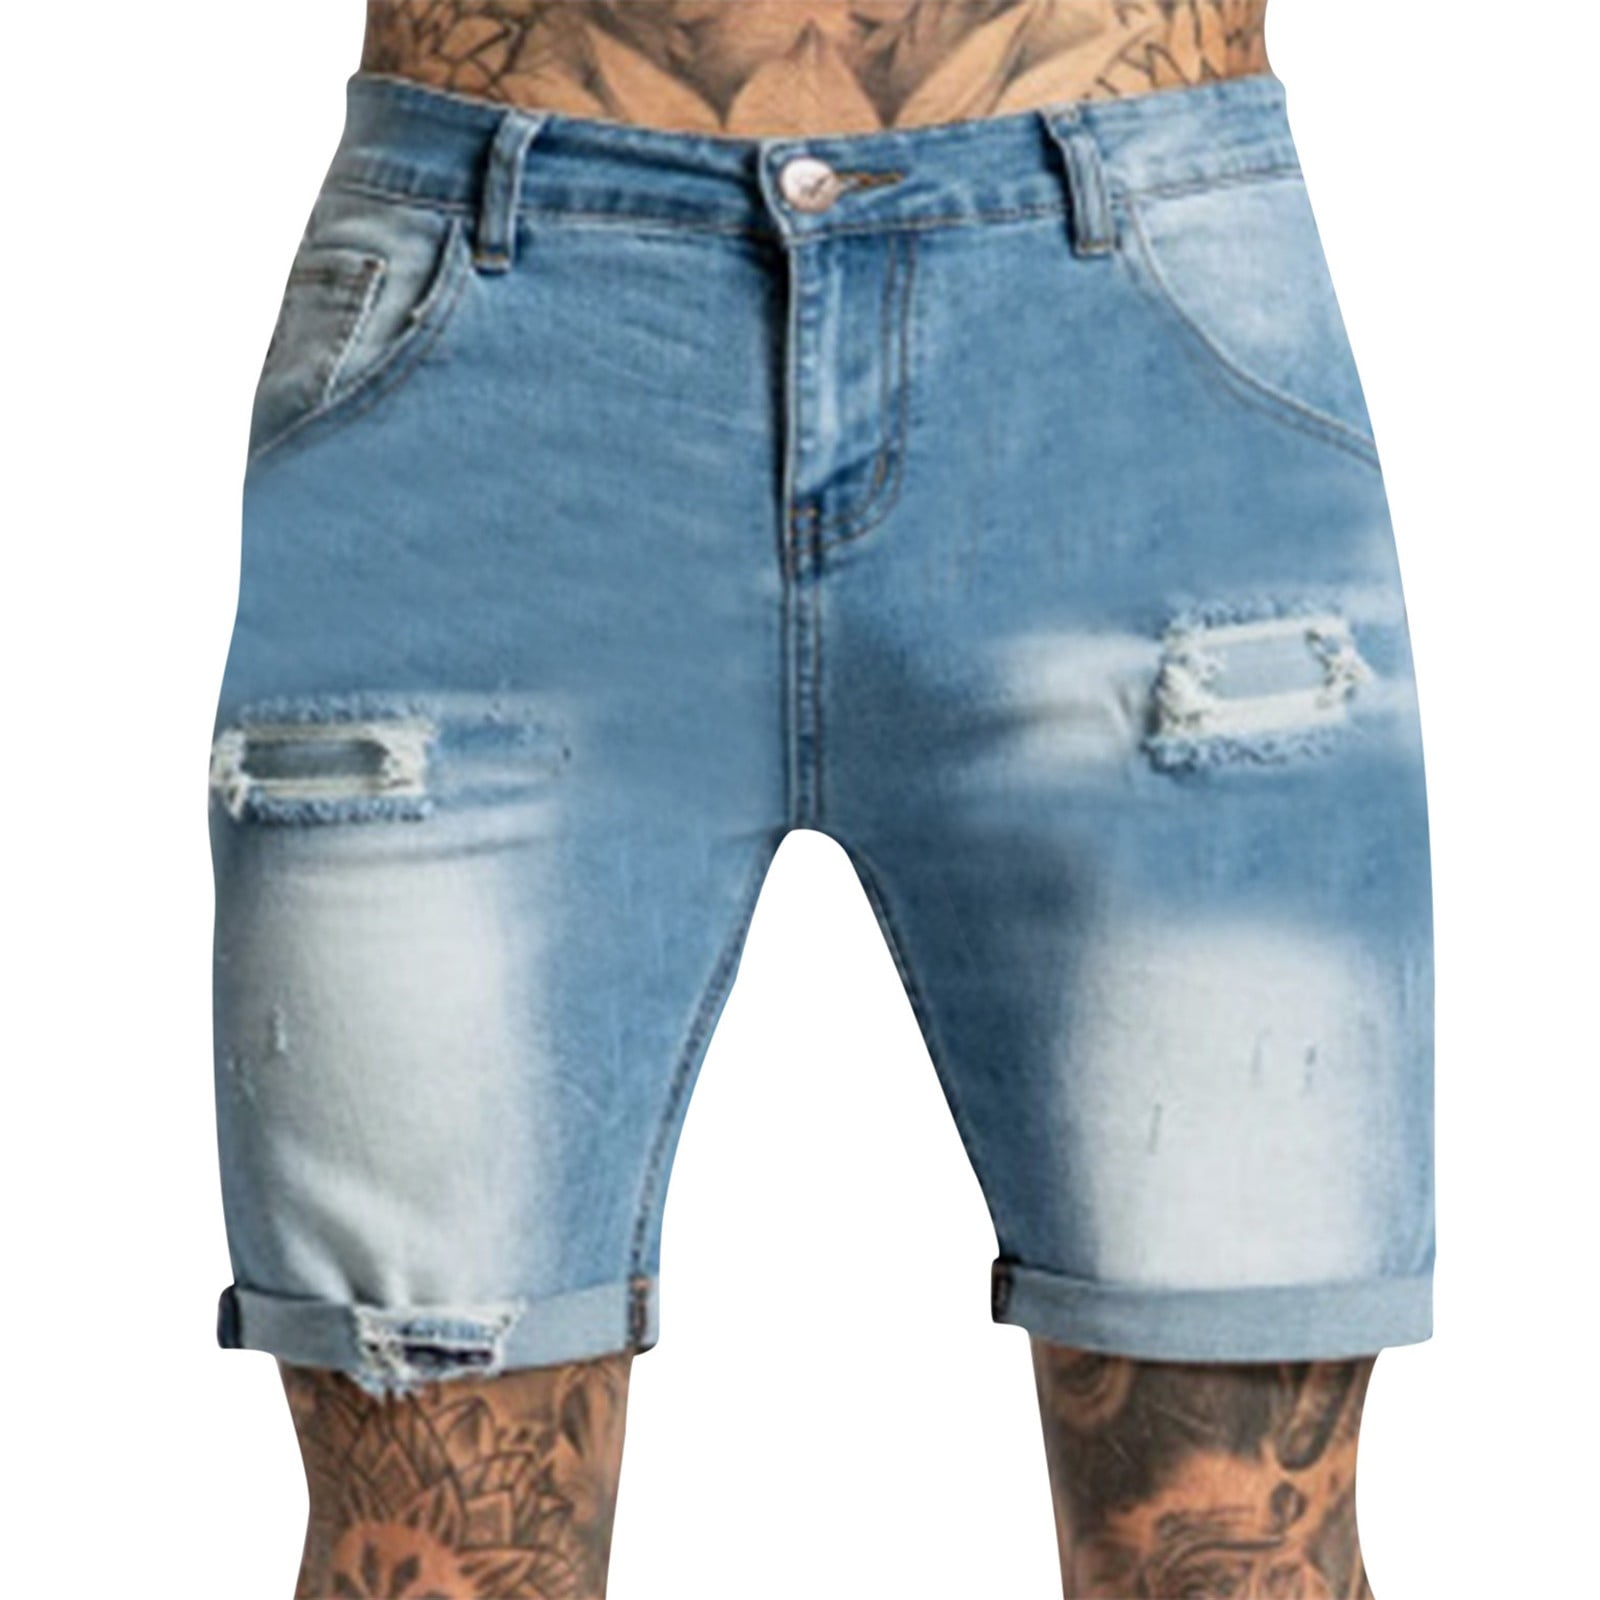 Pedort Shorts For Men High Waisted Jeans For Men Stretch Fit Baggy Jean ...